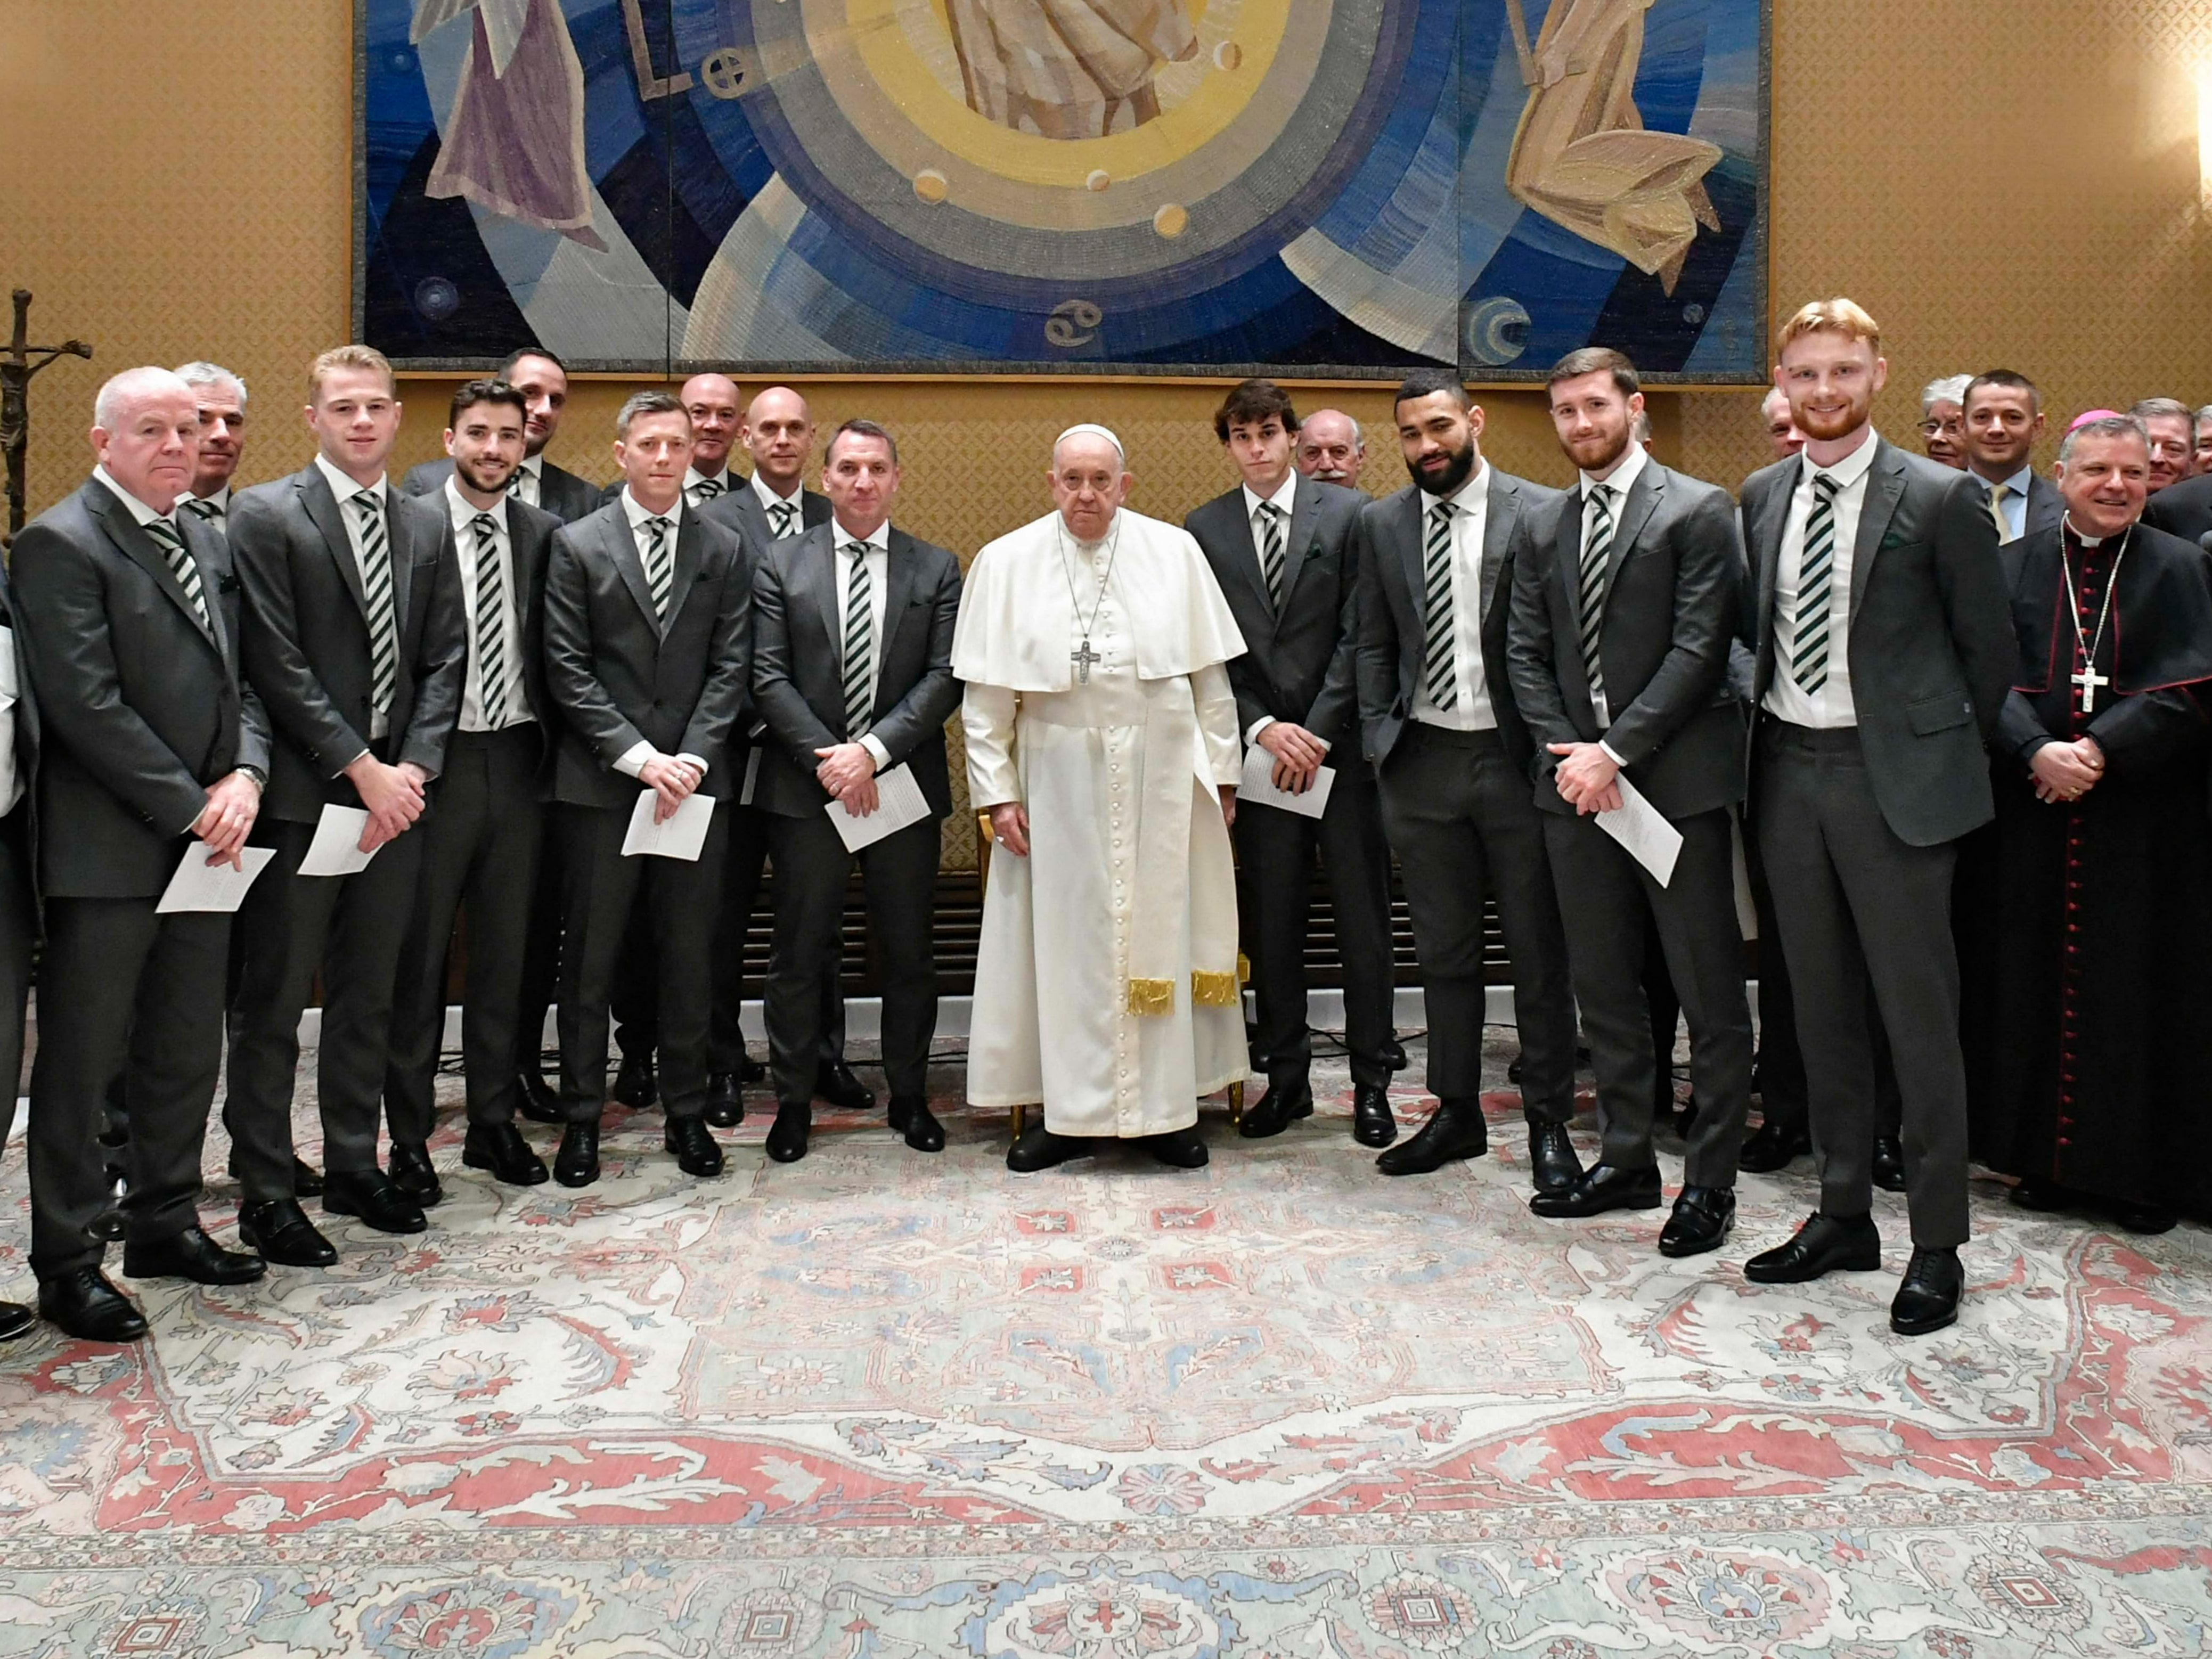 The Pope urged the Celtic squad to retain an “amateur spirit”